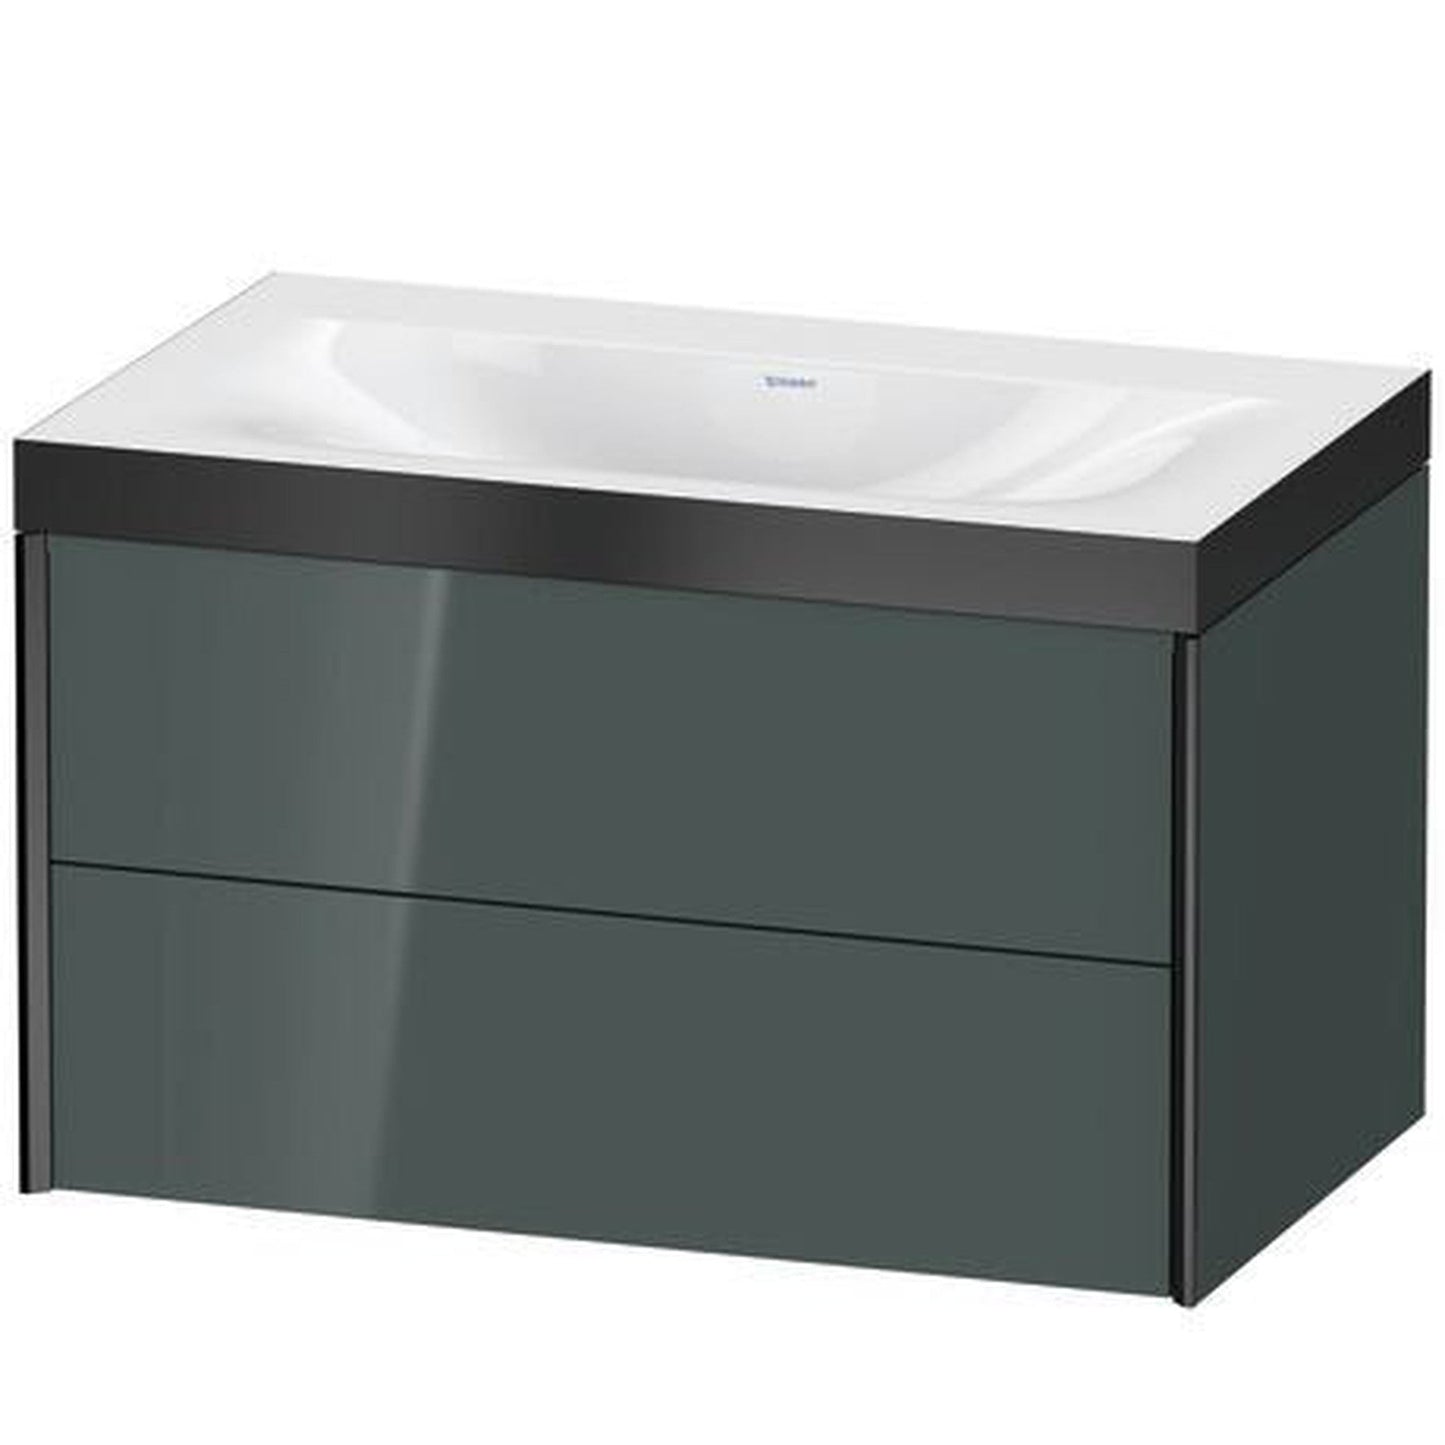 Duravit Xviu 31" x 20" x 19" Two Drawer C-Bonded Wall-Mount Vanity Kit Without Tap Hole, Dolomite Gray (XV4615NB238P)